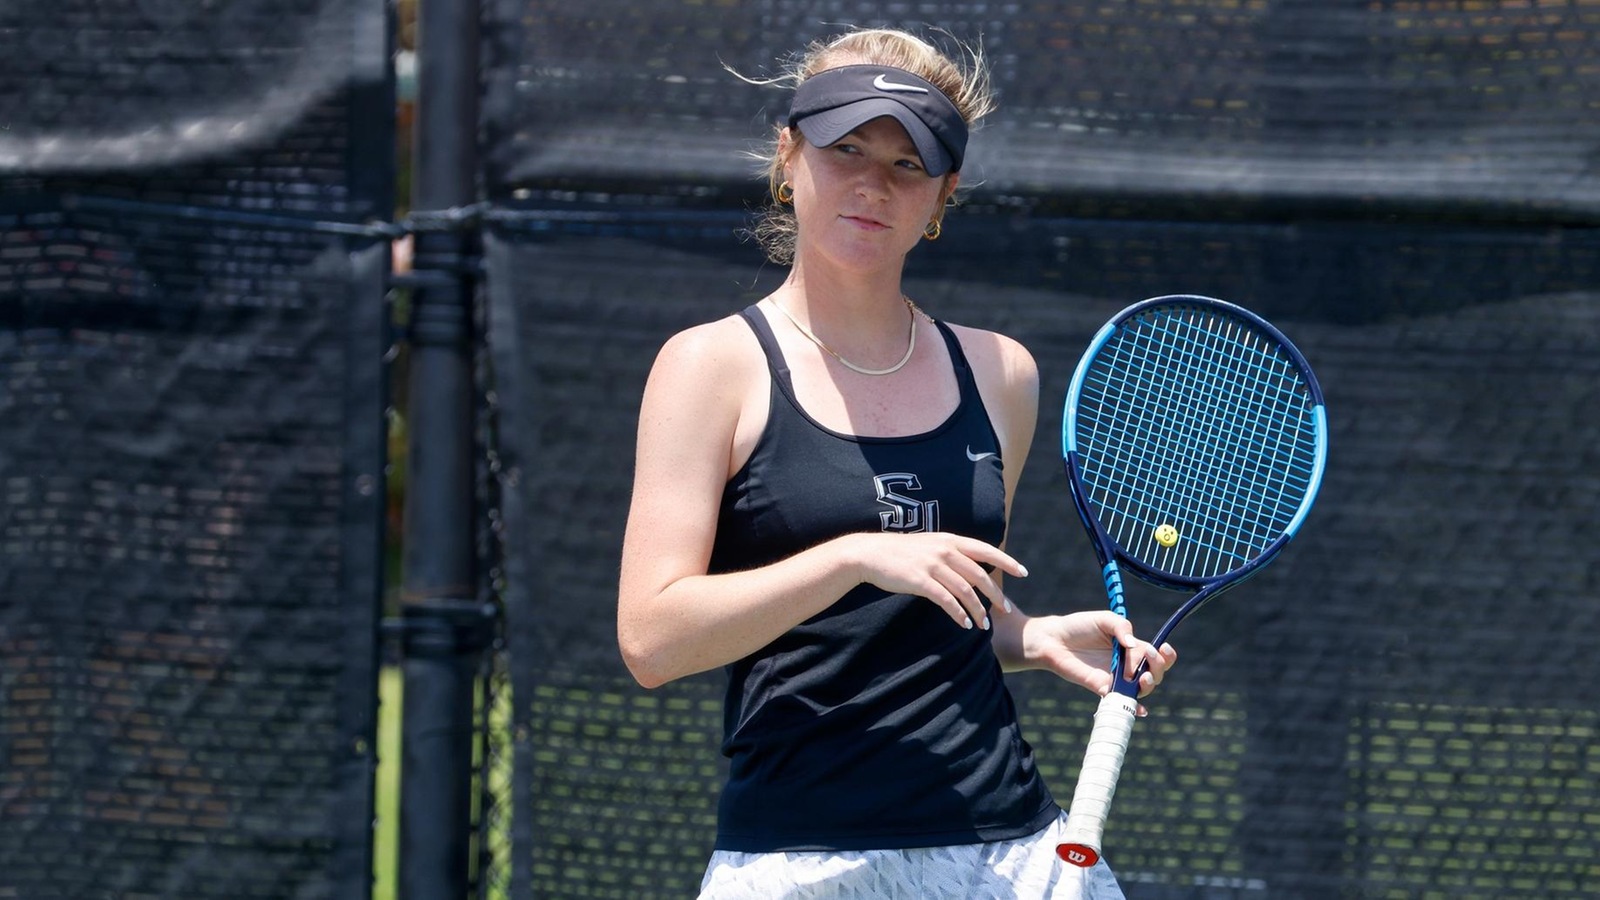 Top of Singles Lineup Shines In Loss to Tarleton State